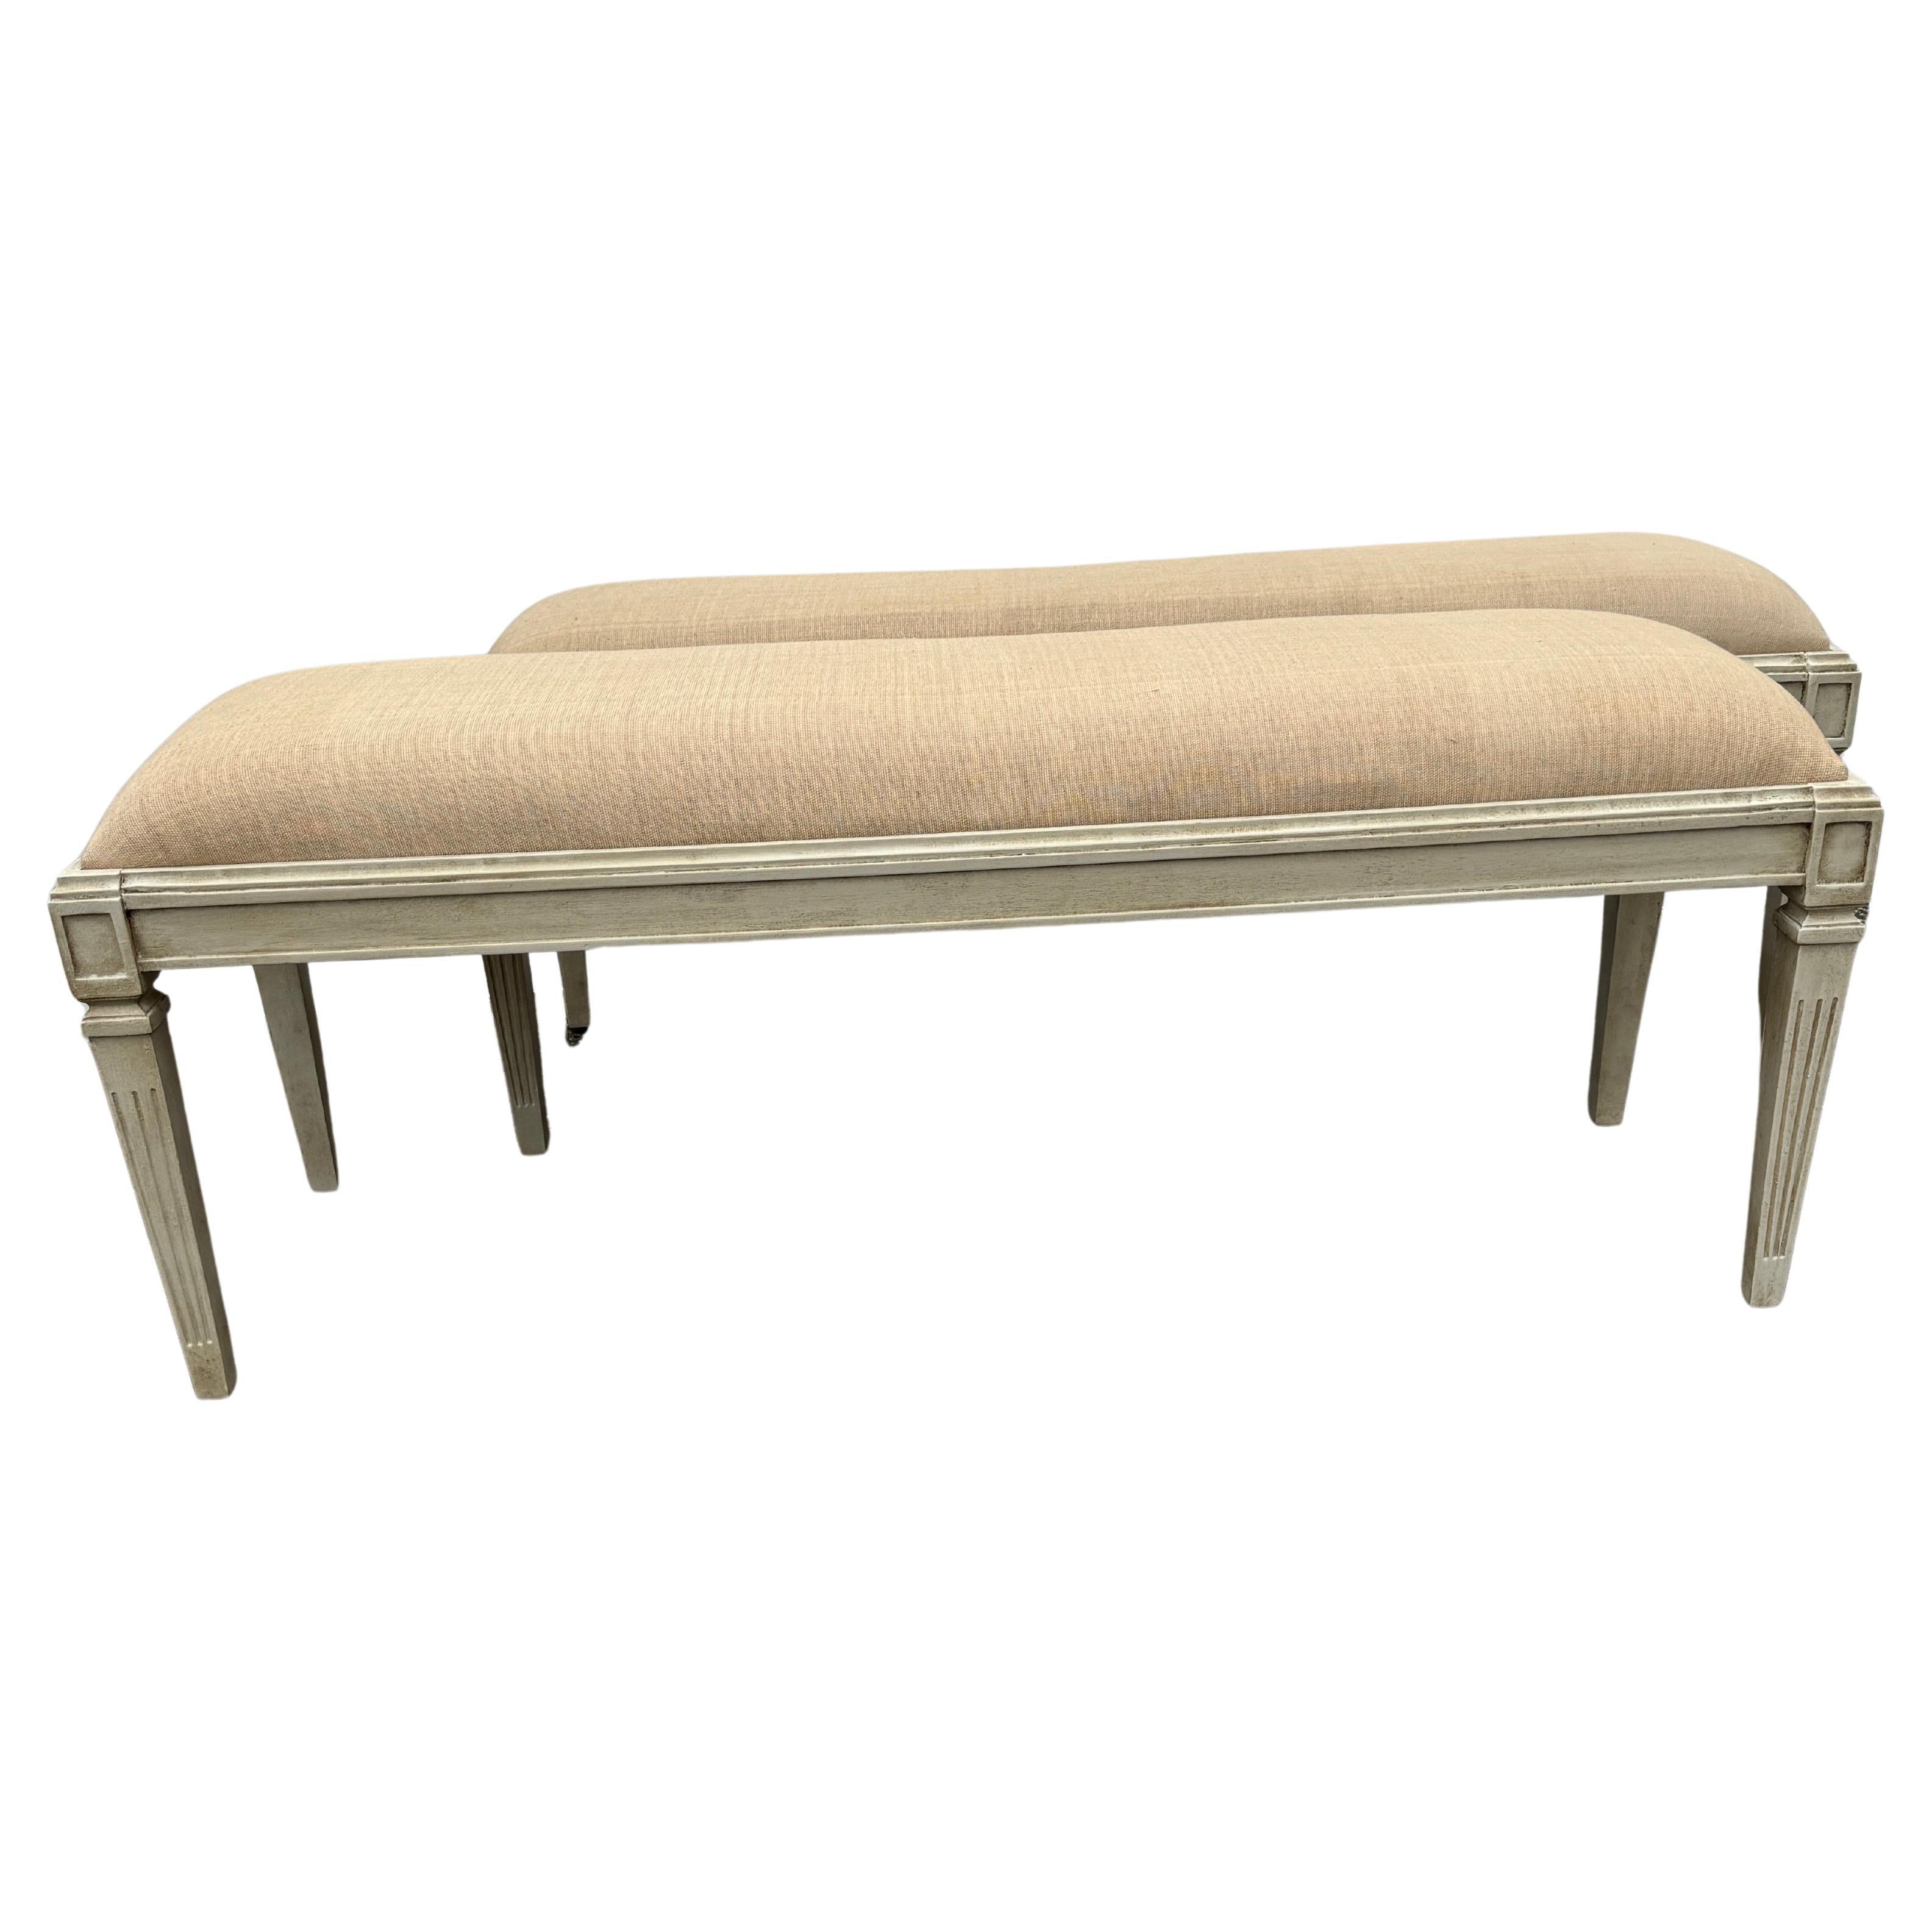 Hand-Crafted Pair Of Wide Painted Upholstered Benches in Swedish Gustavian Style For Sale